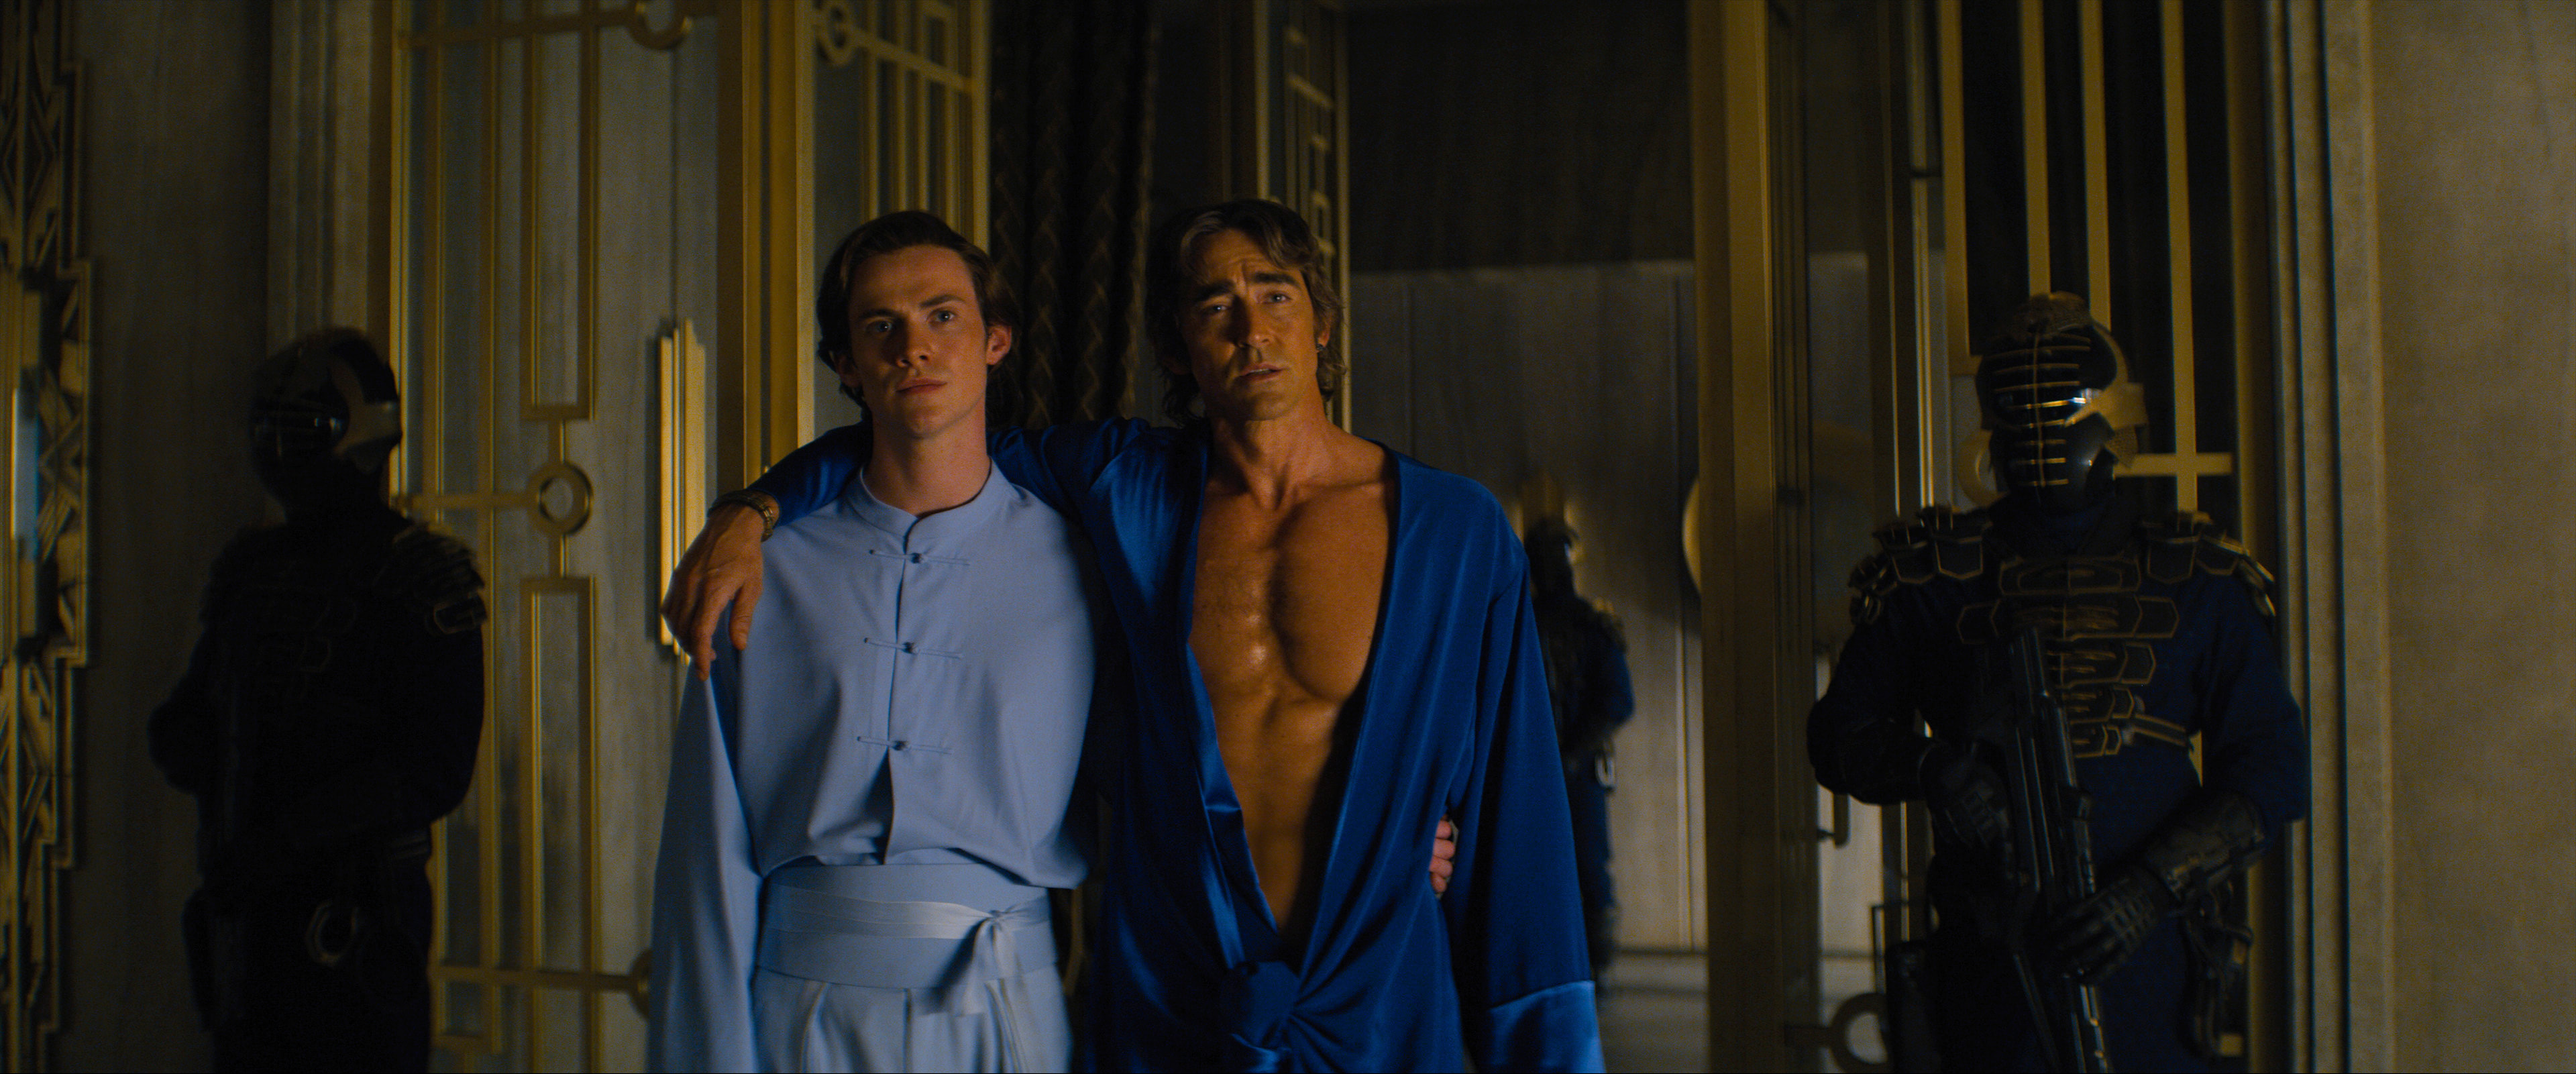 Brother Dawn (Cassian Dilton) standing with his arm around Brother Day (Lee Pace) in a still from Foundation 